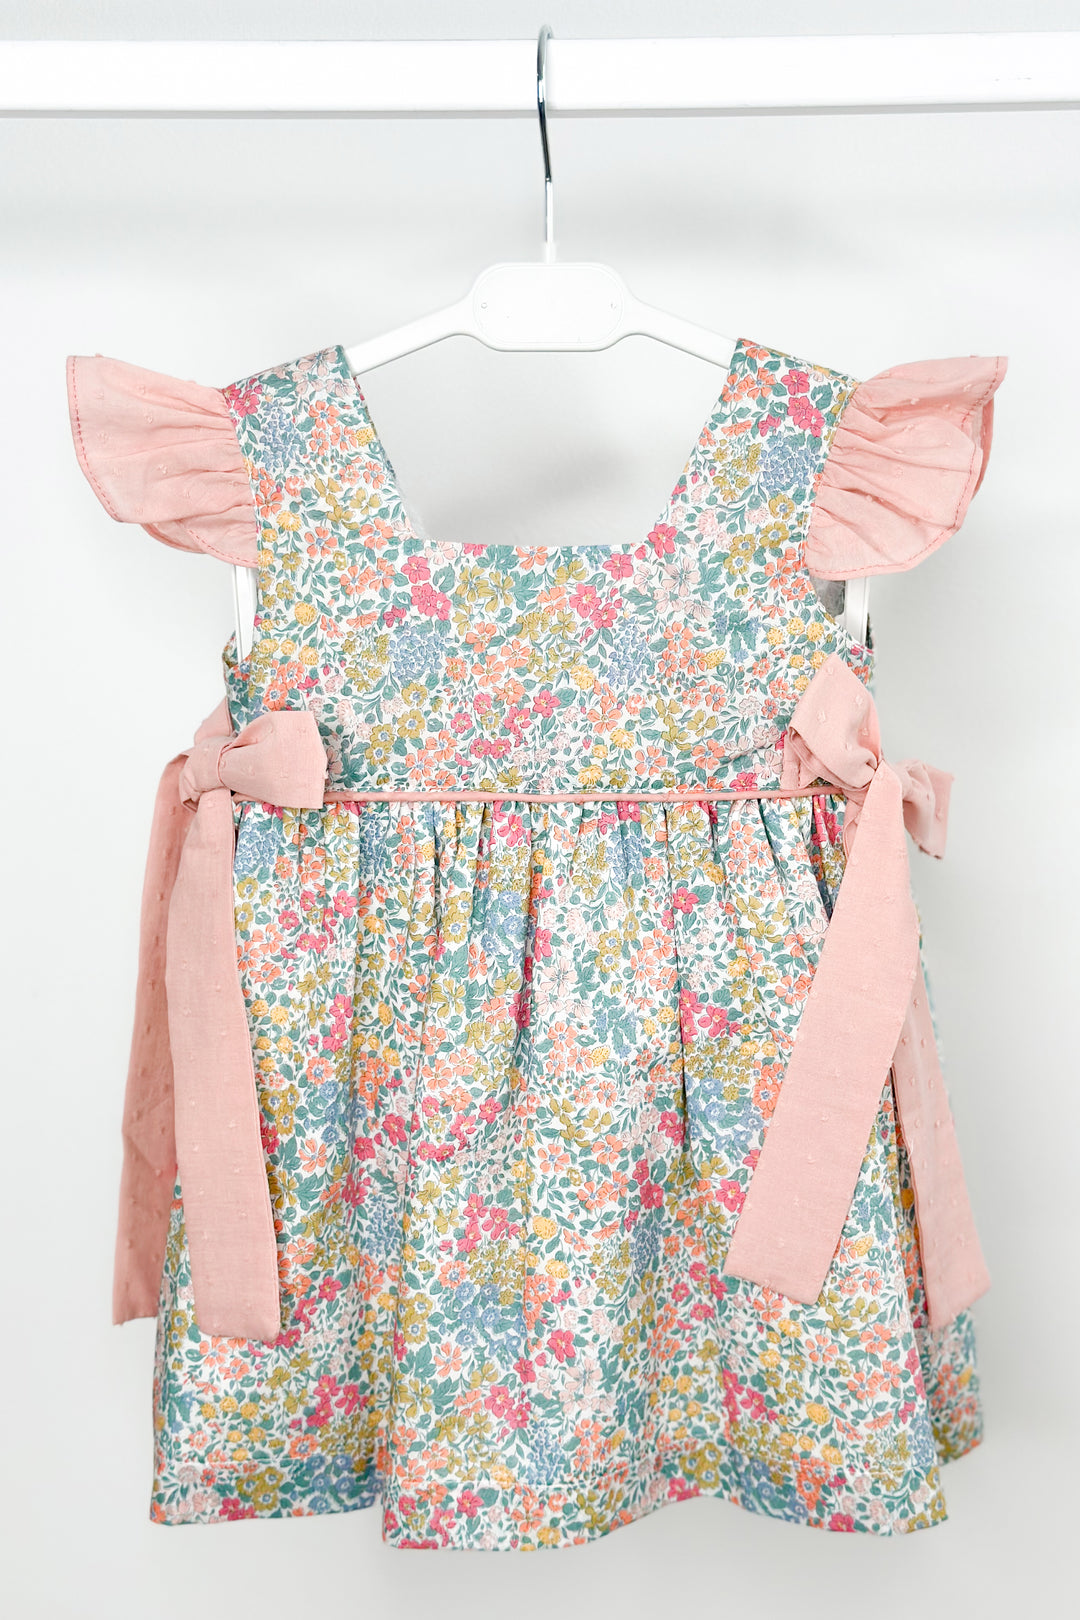 Puro Mimo "Joanna" Green & Pale Rose Floral Dress | Millie and John